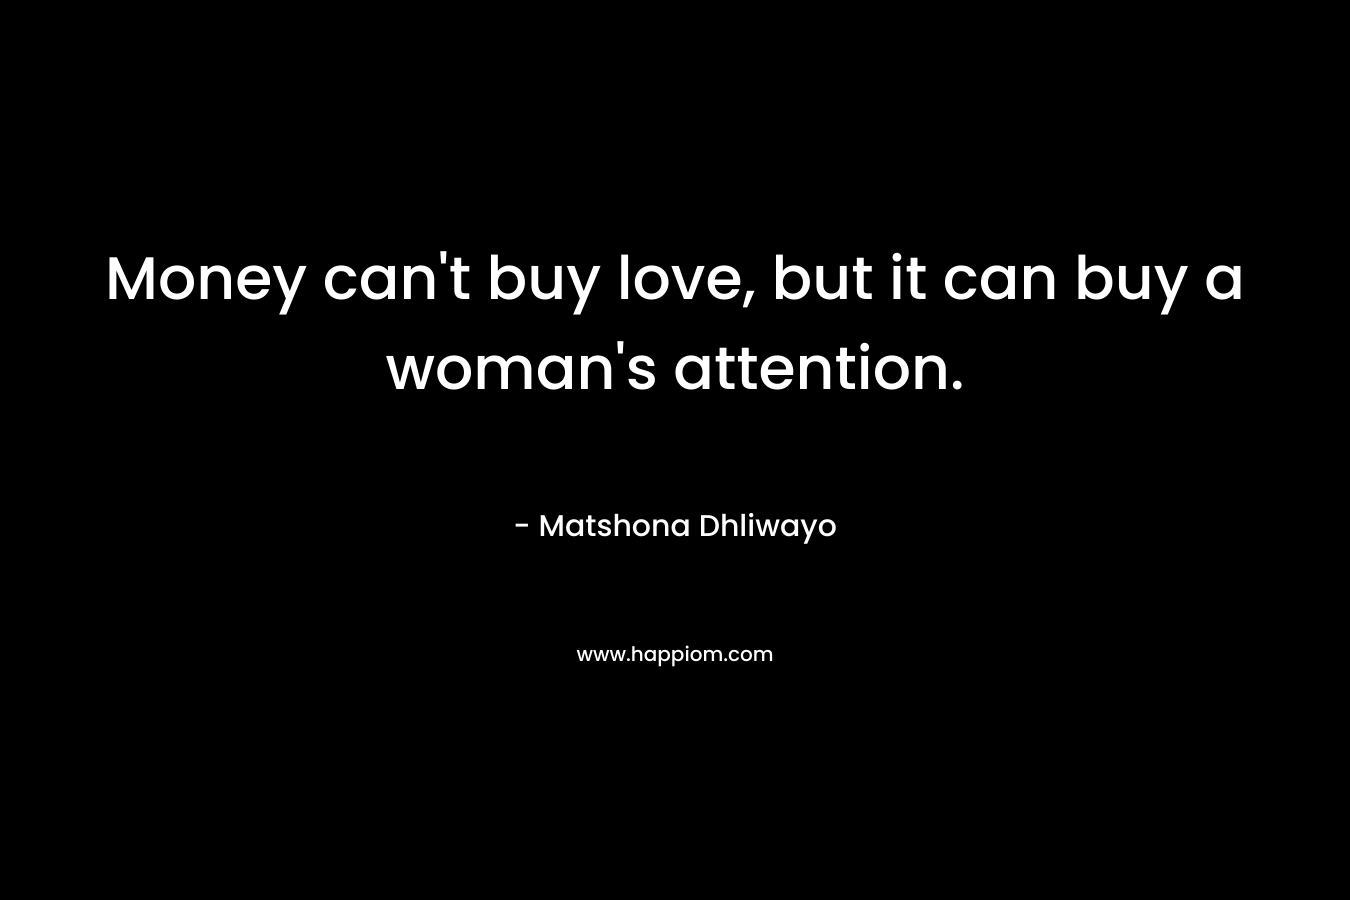 Money can’t buy love, but it can buy a woman’s attention. – Matshona Dhliwayo